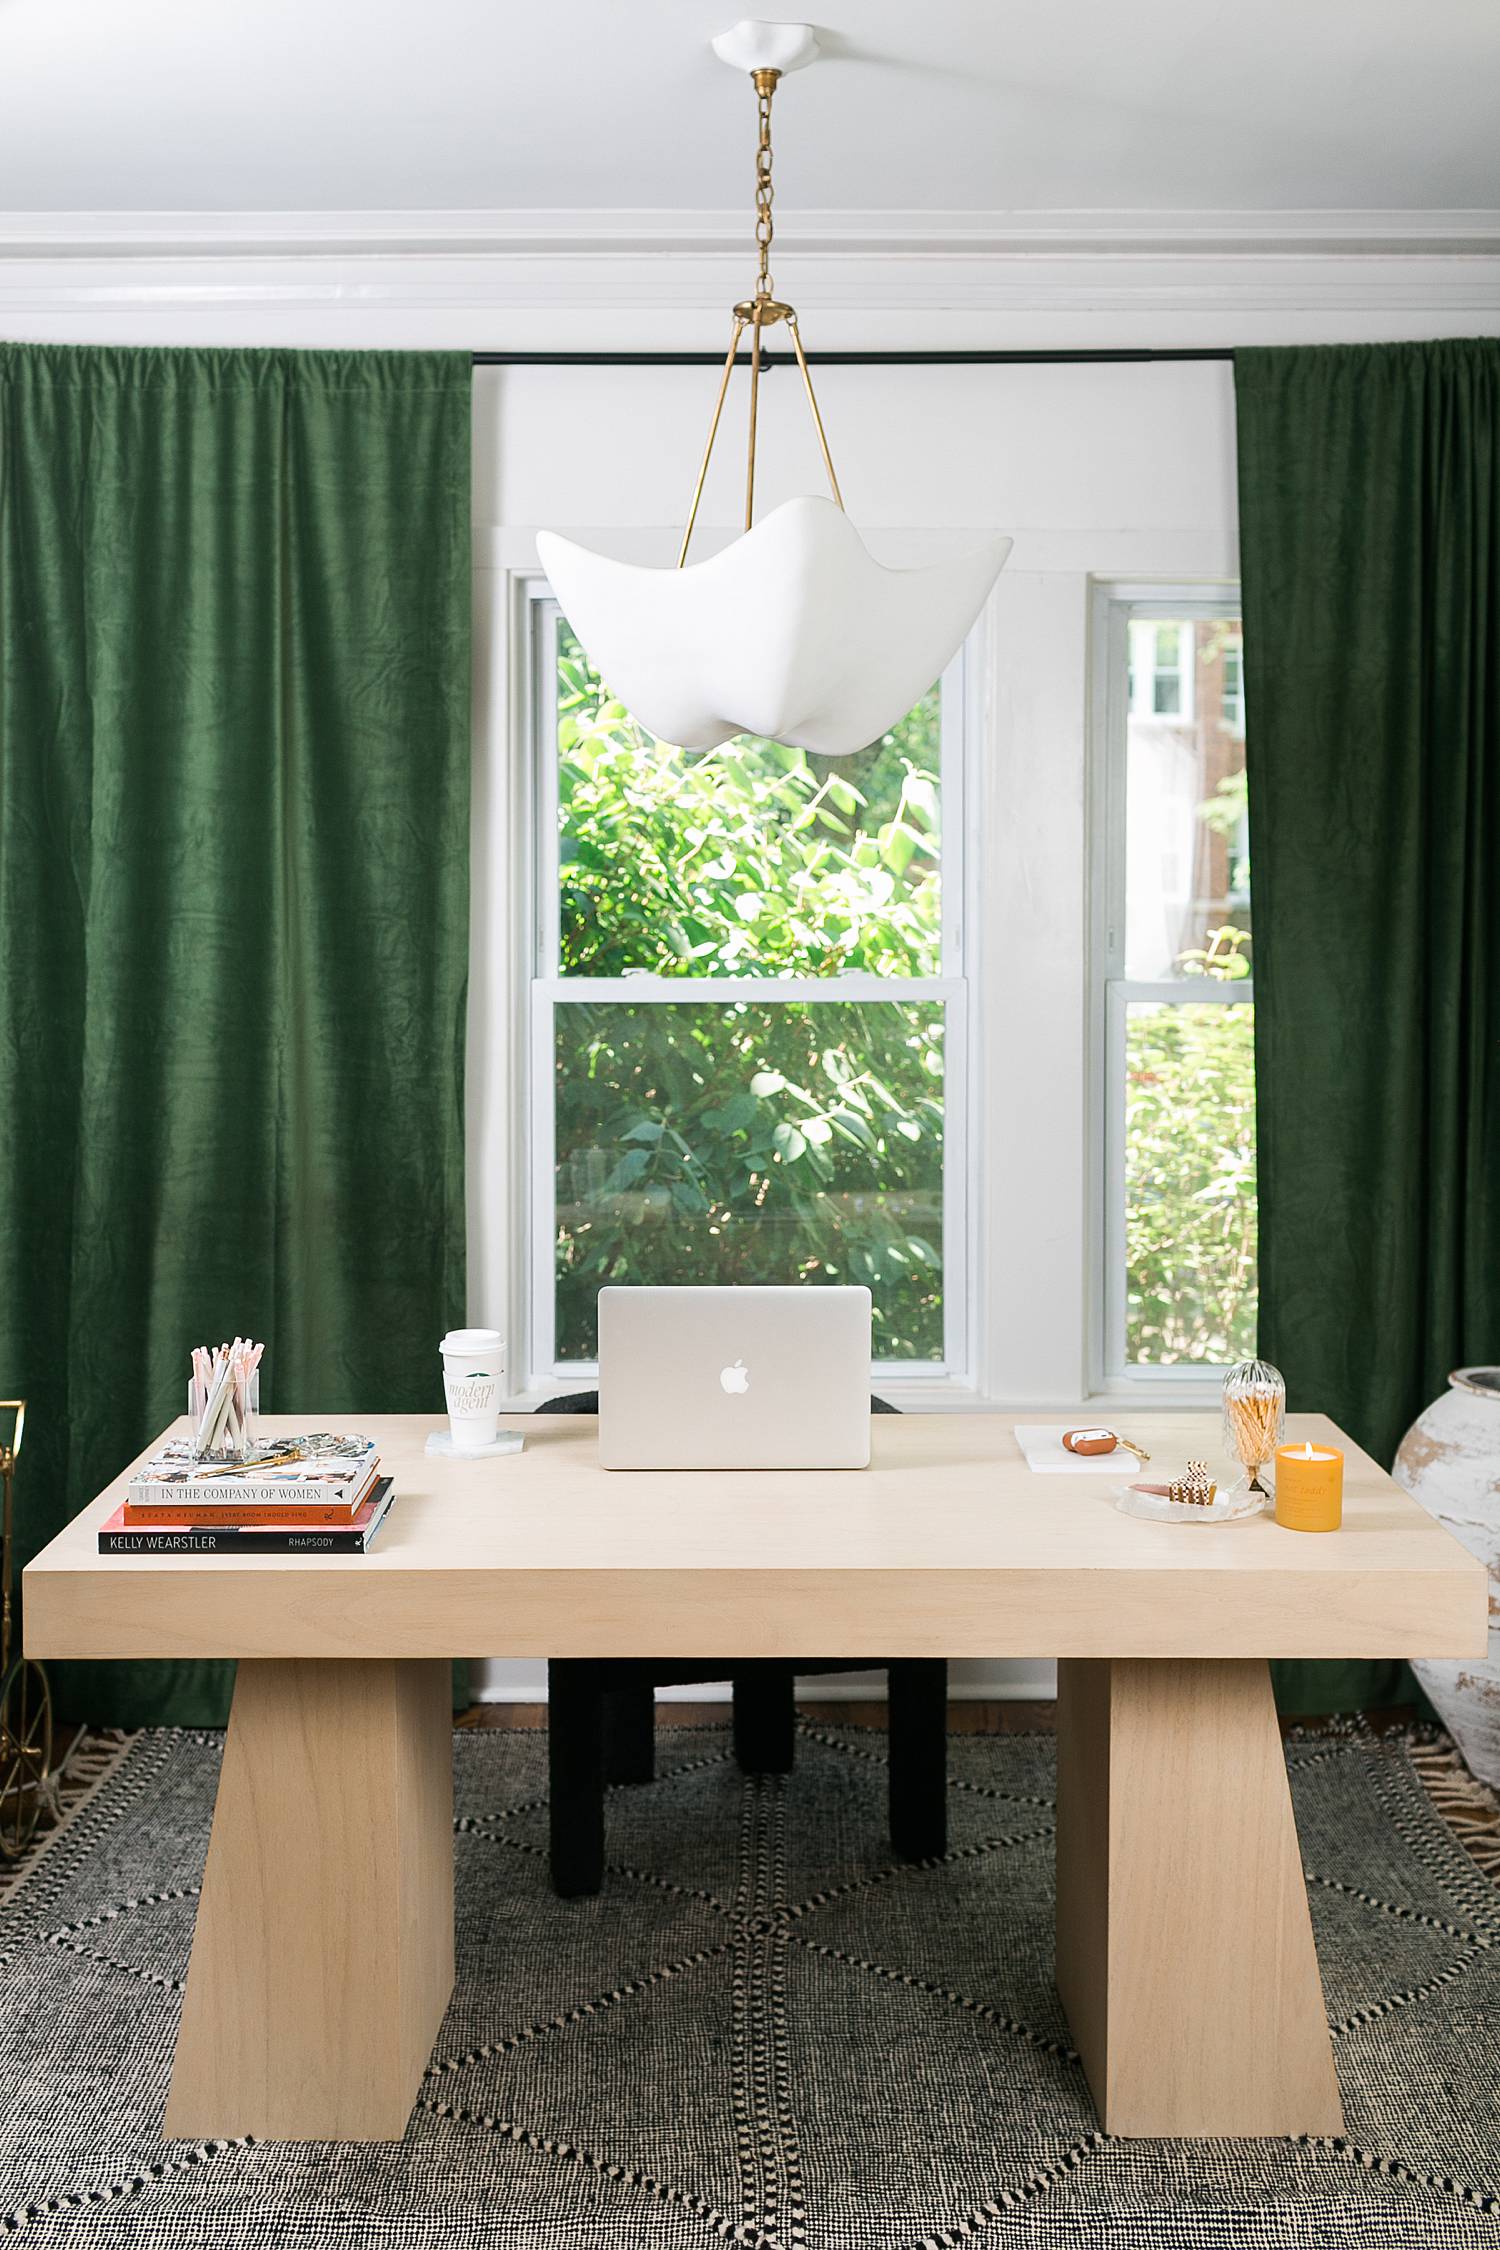 modern home office with light wooden desk and green curtains, macbook laptop on the desk and candle burning